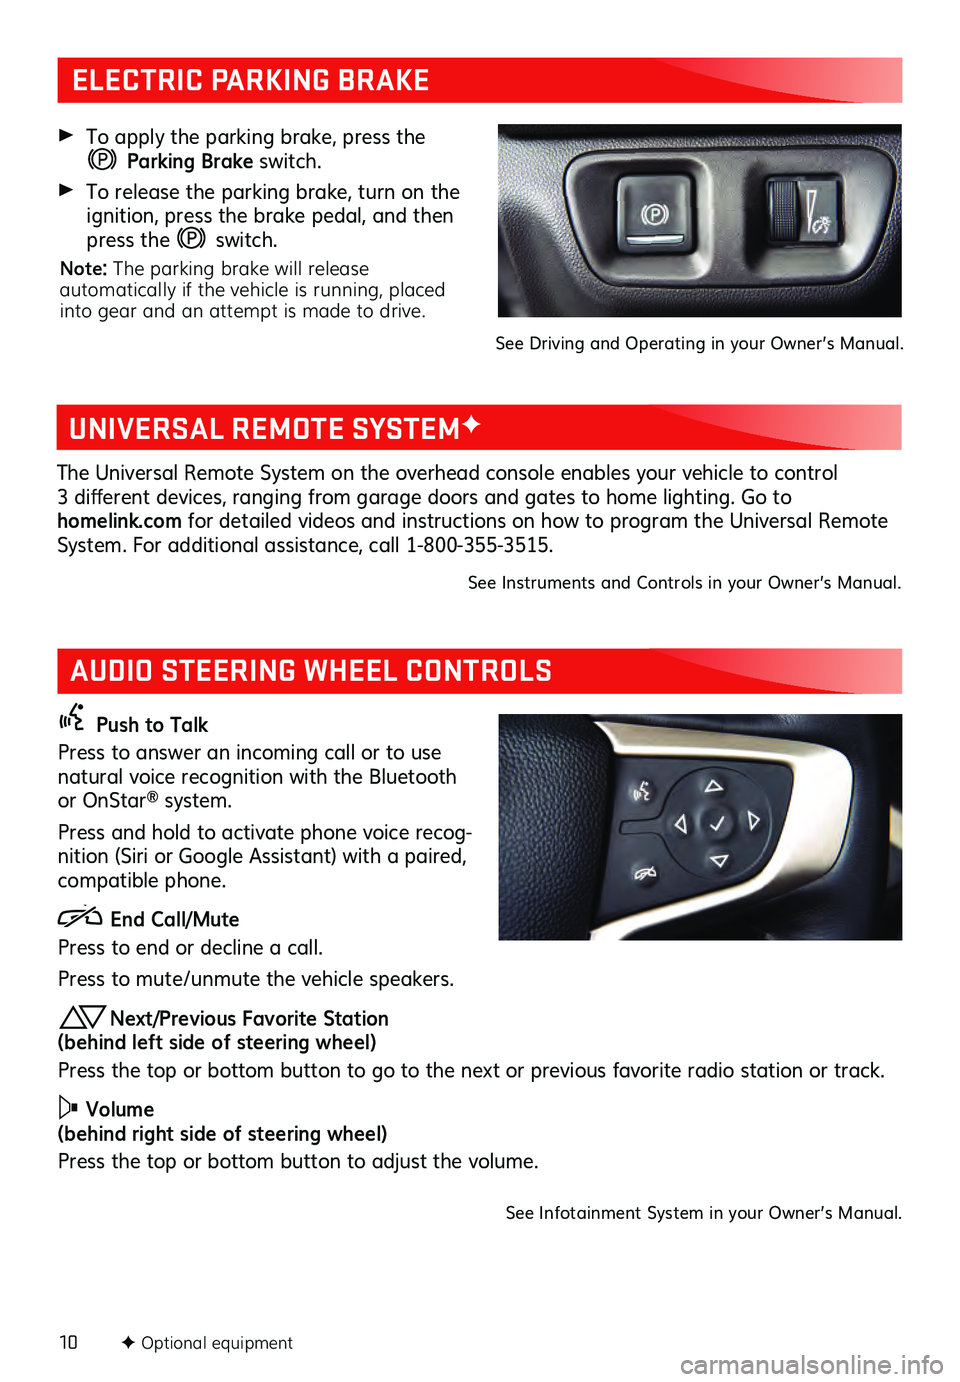 GMC ACADIA 2021  Get To Know Guide 10F Optional equipment  
AUDIO STEERING WHEEL CONTROLS
  Push to Talk
Press to answer an incoming call or to use 
natural voice recognition with the Bluetooth 
or OnStar
® system. 
Press and hold to 